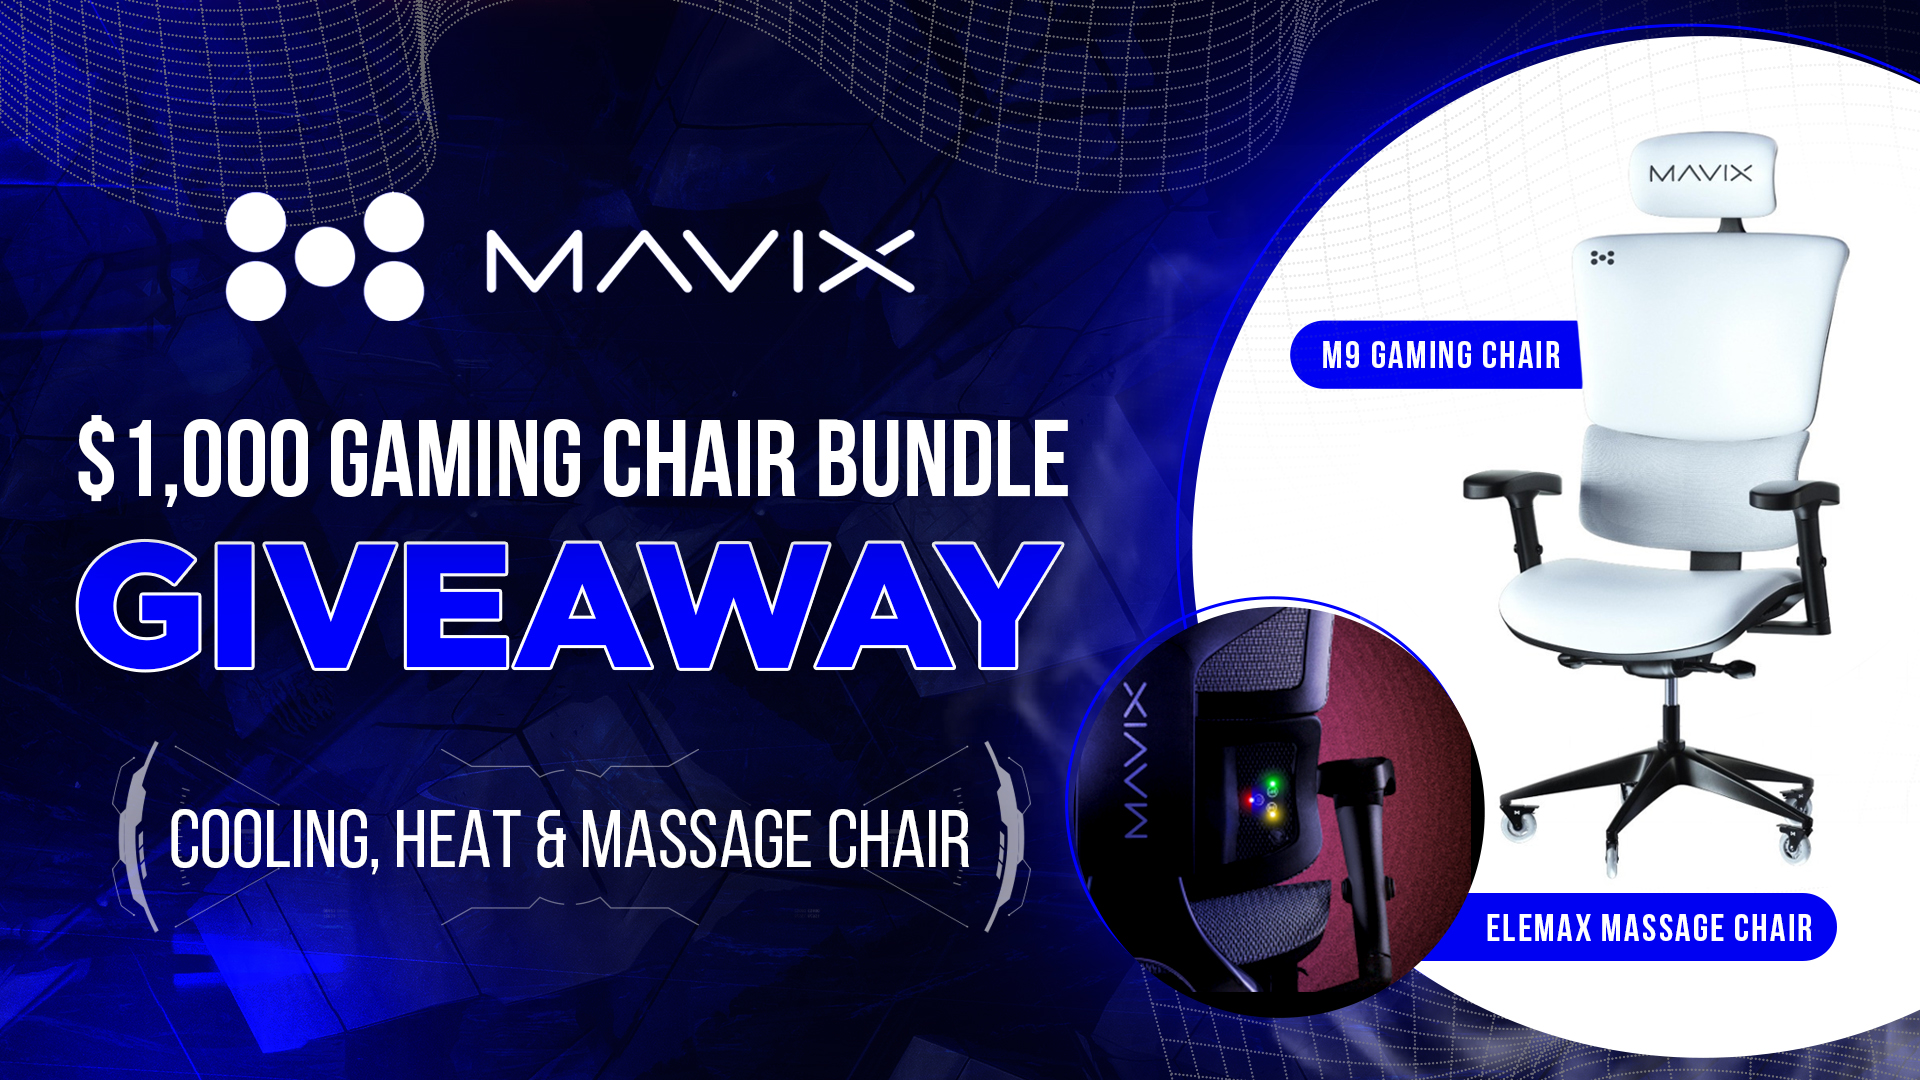 Mavix 1 000 M9 Elemax Gaming Chair Giveaway Vast Expand Your Reach